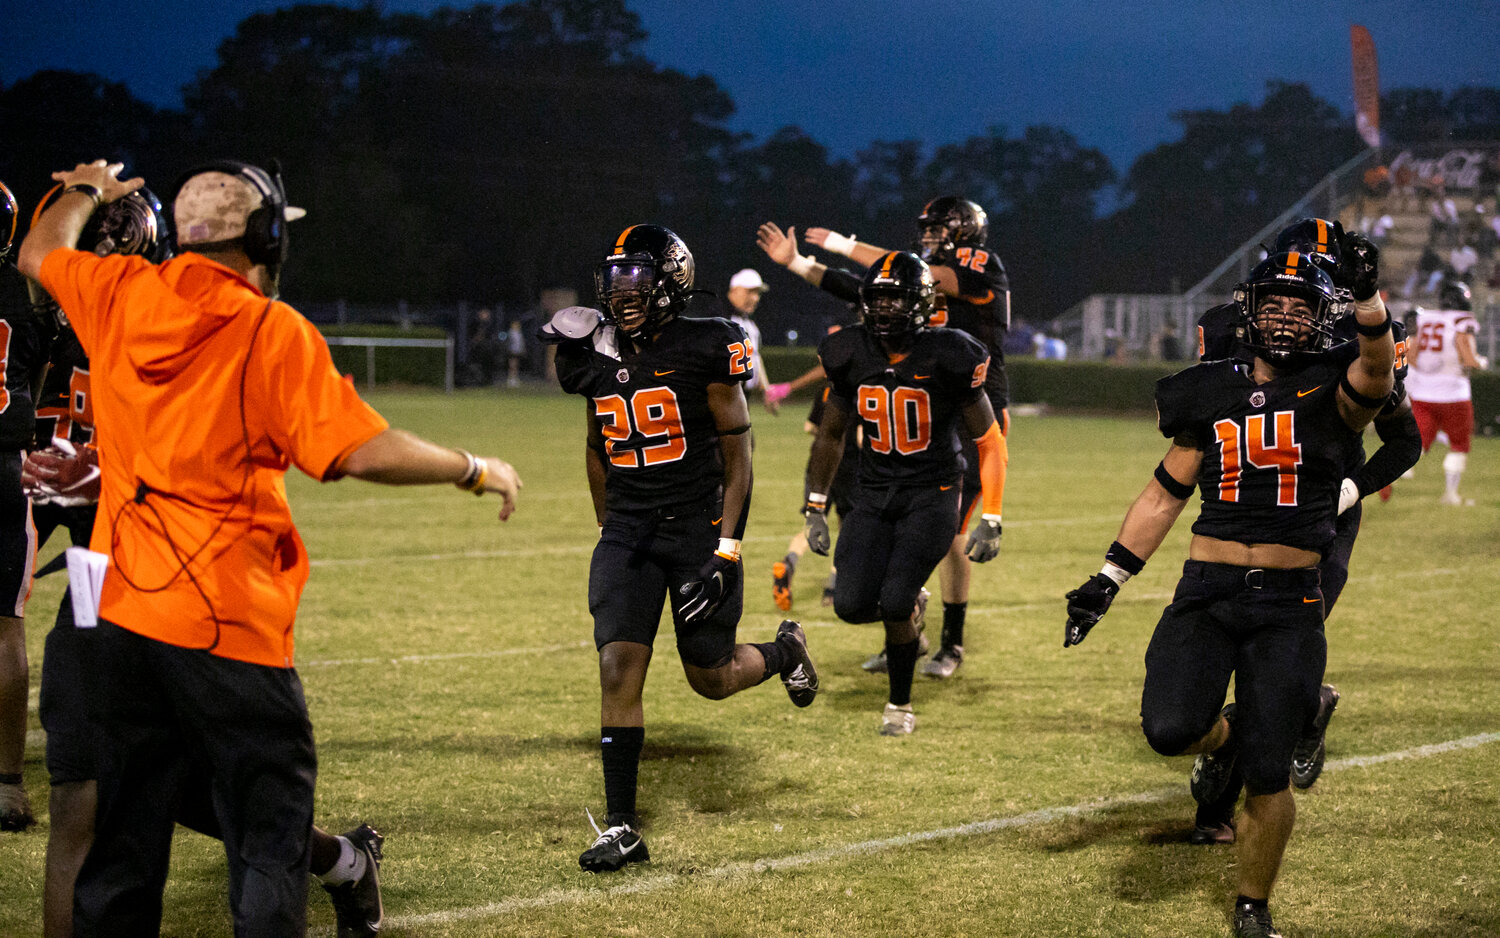 The Baldwin County defense, including PJ Cook (14) and Kendreas Nelson (90), runs to its sideline to celebrate Malachi Stevens’ (29) interception in the first half of the Tigers’ region contest against the Spanish Fort Toros on Mitchell Field at Bay Minette’s Lyle Underwood Stadium on Friday, Sept. 8. It was one of four takeaways earned by Baldwin County in its 14-13 loss.